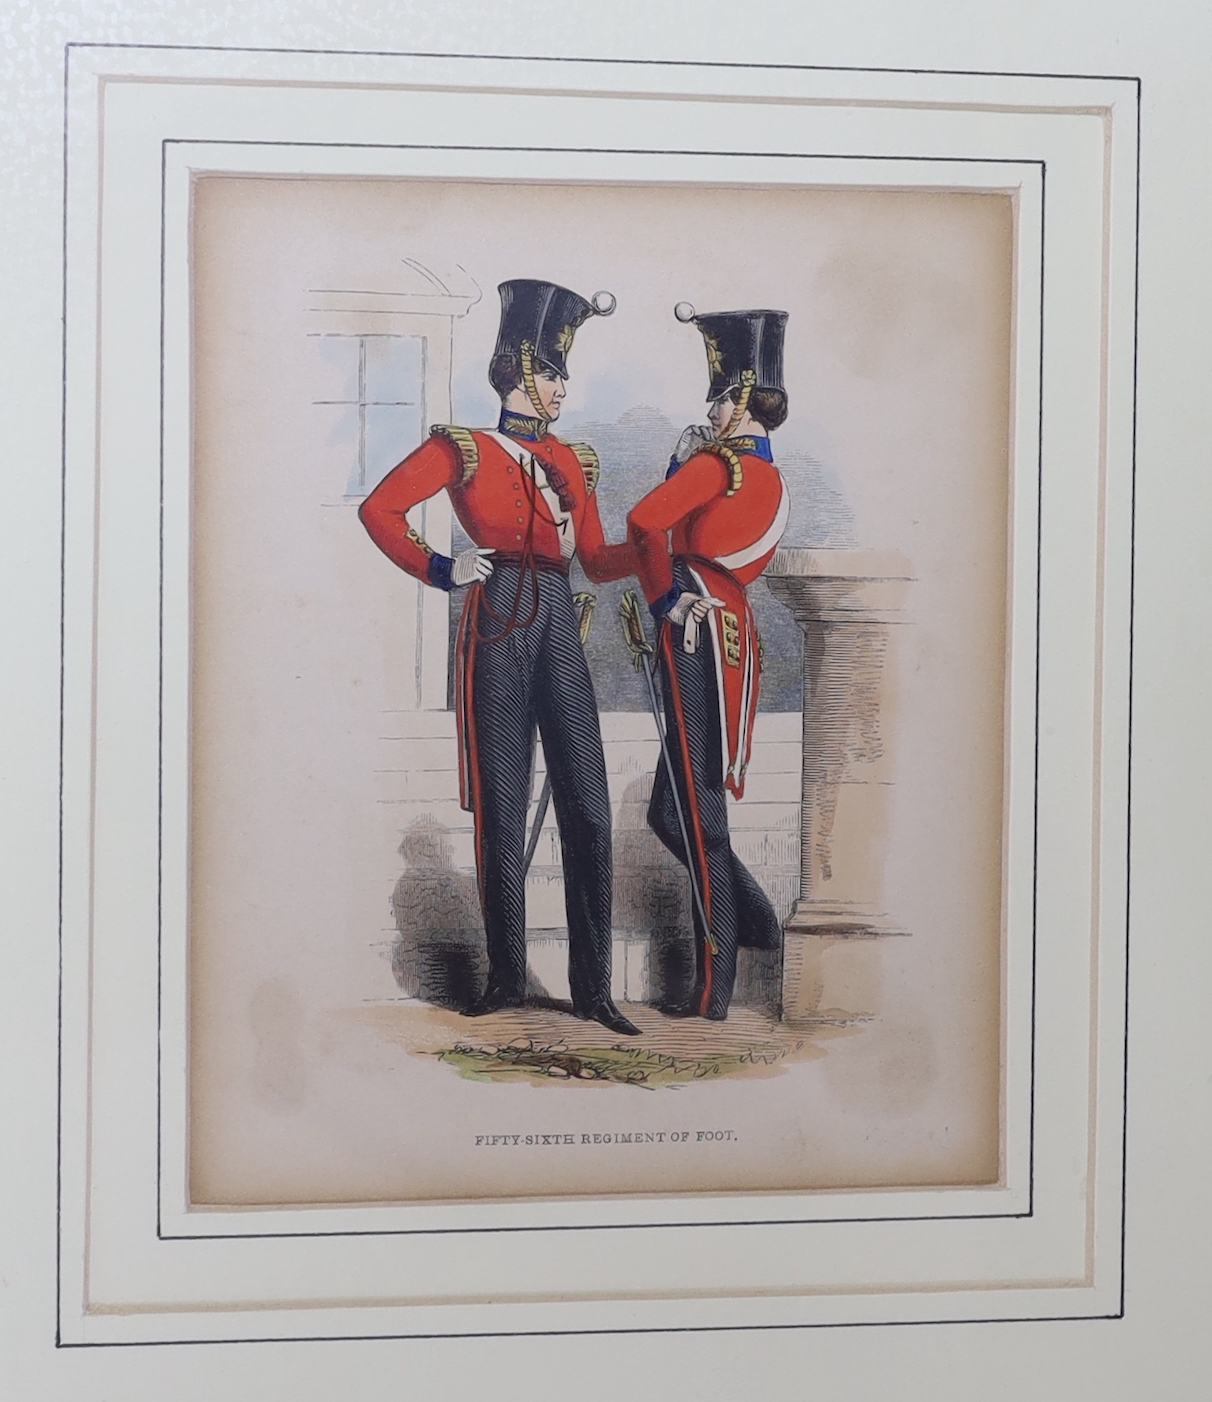 After Henry Martens (1790-1868), set of 20 19th century military engravings published by Rudolf Ackermann and various other military interest prints, including Royal Horse Artillery 1843 and a Christmas Dinner on the Hei